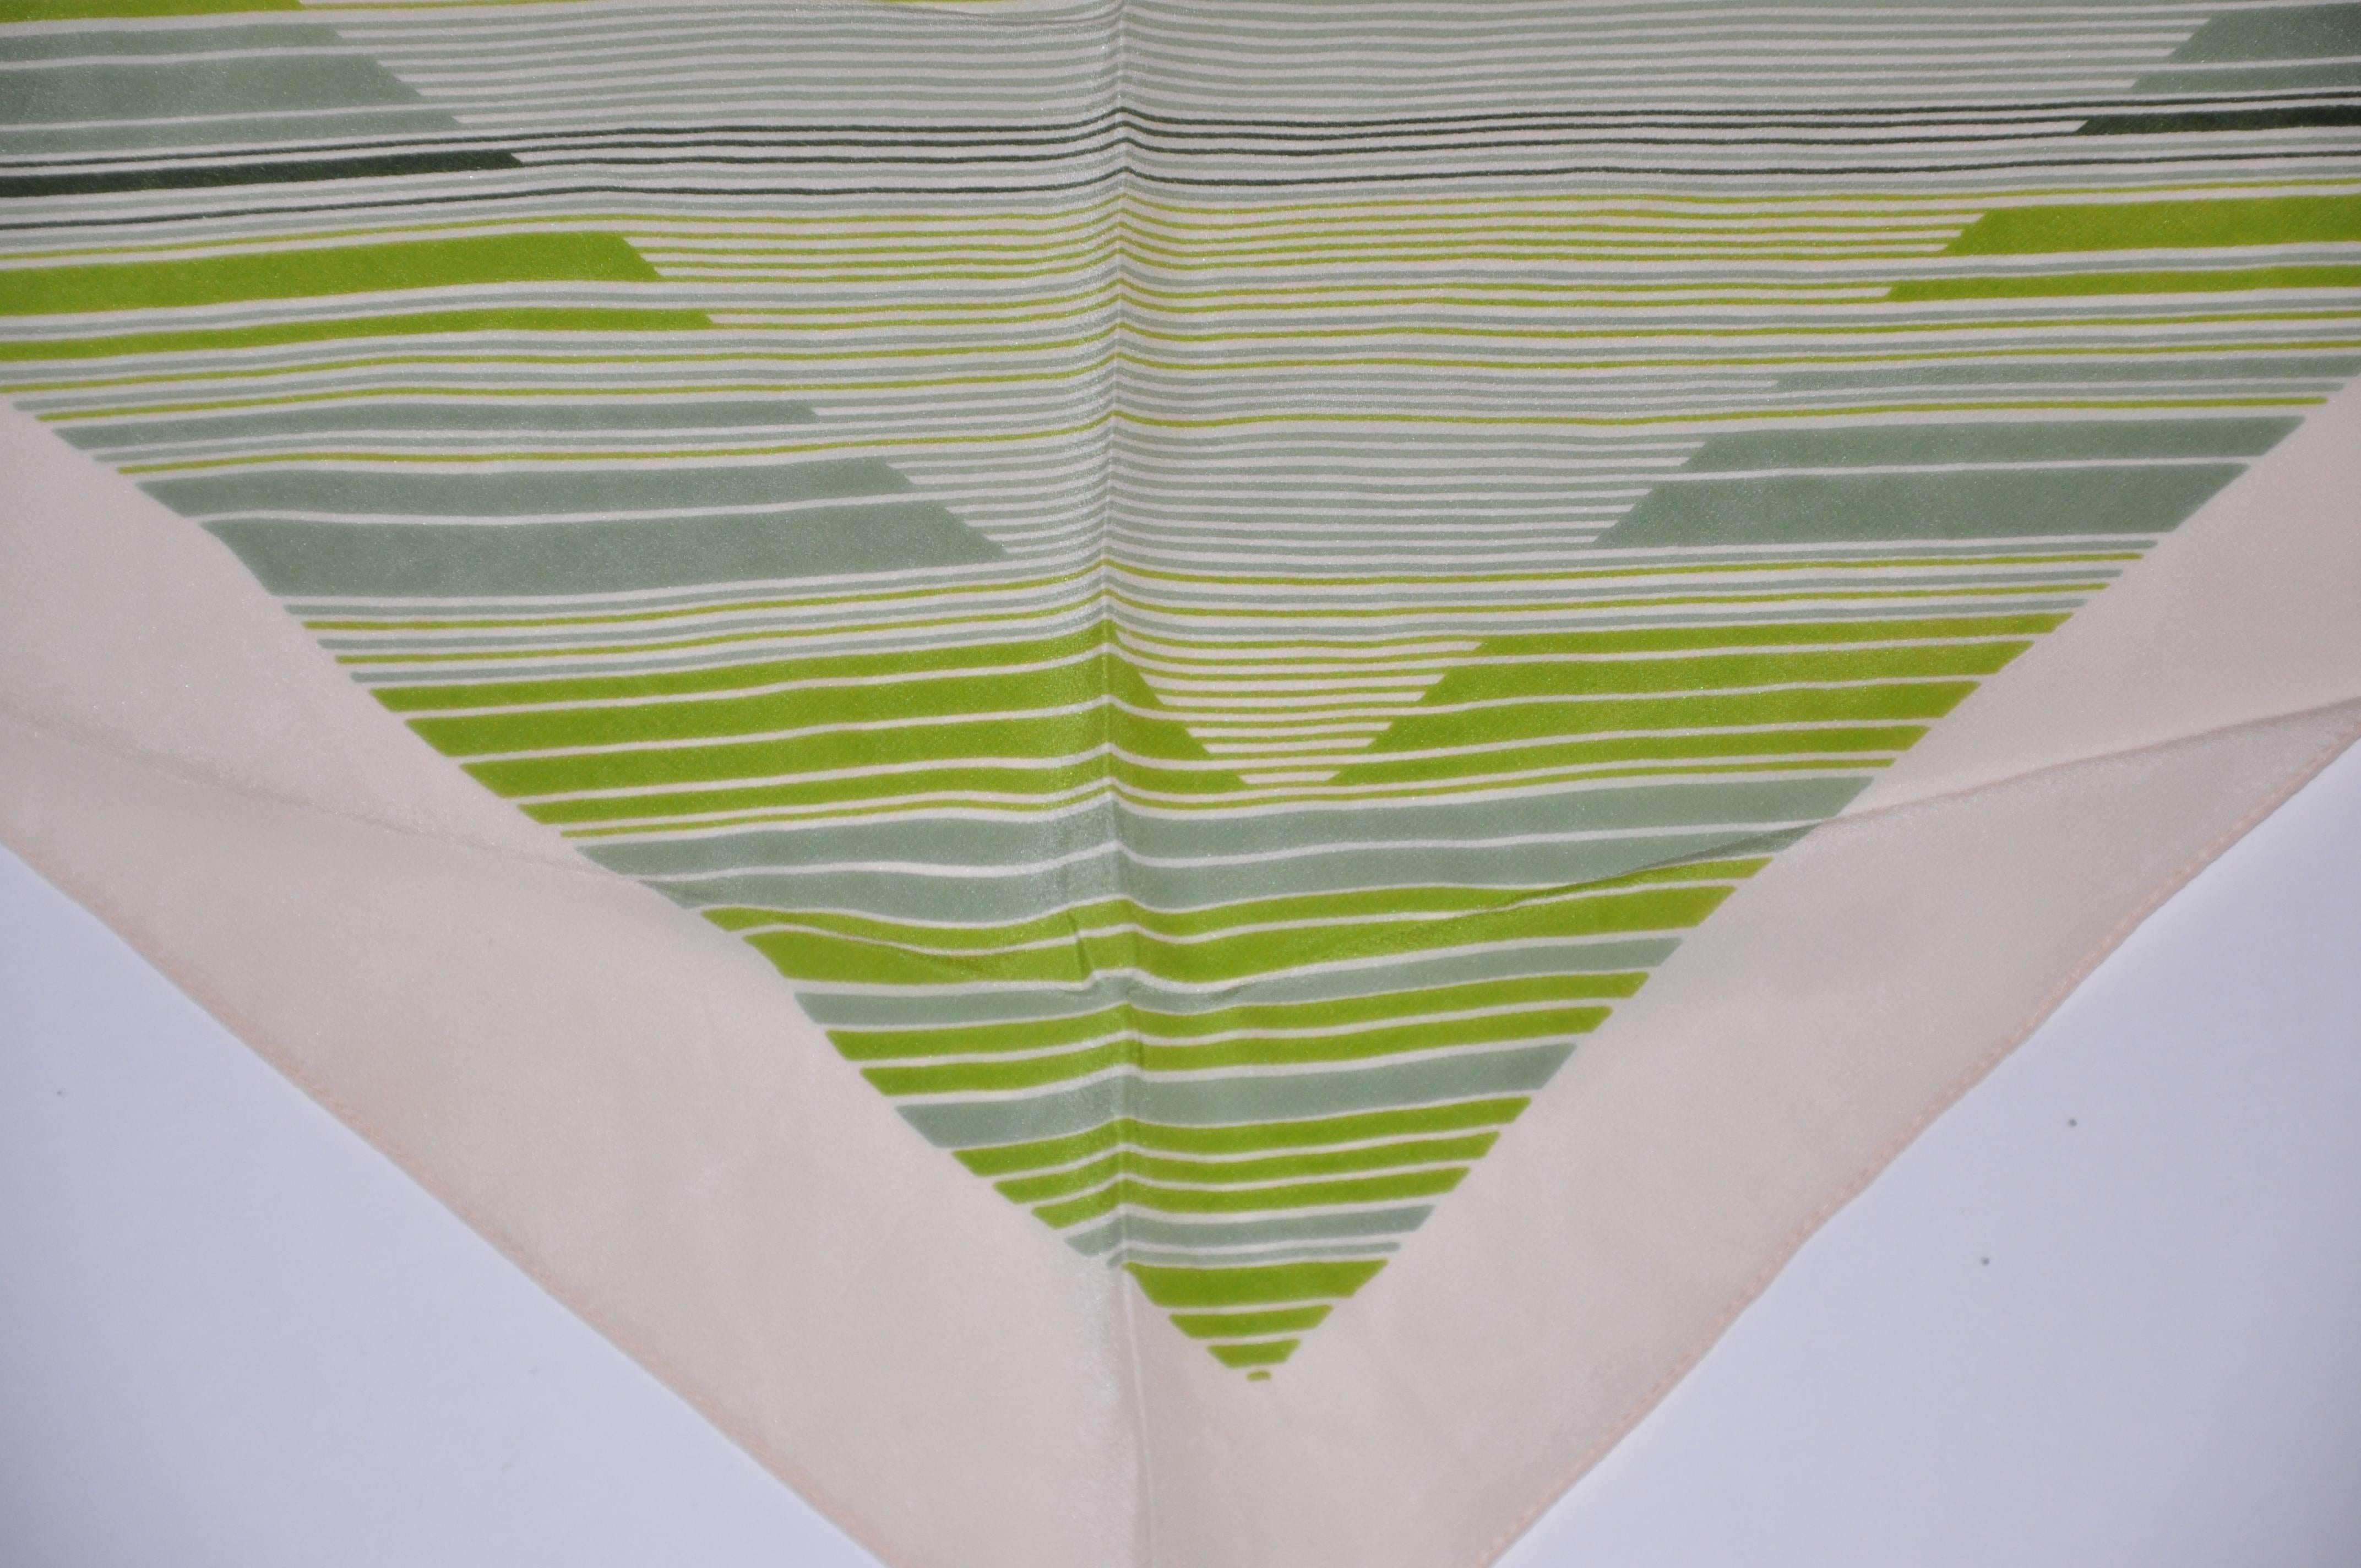 Geoffrey Beene beige border accented with multi-green stripes triangle silkscarf measures 24" x 54". Made of silk and made in Japan.